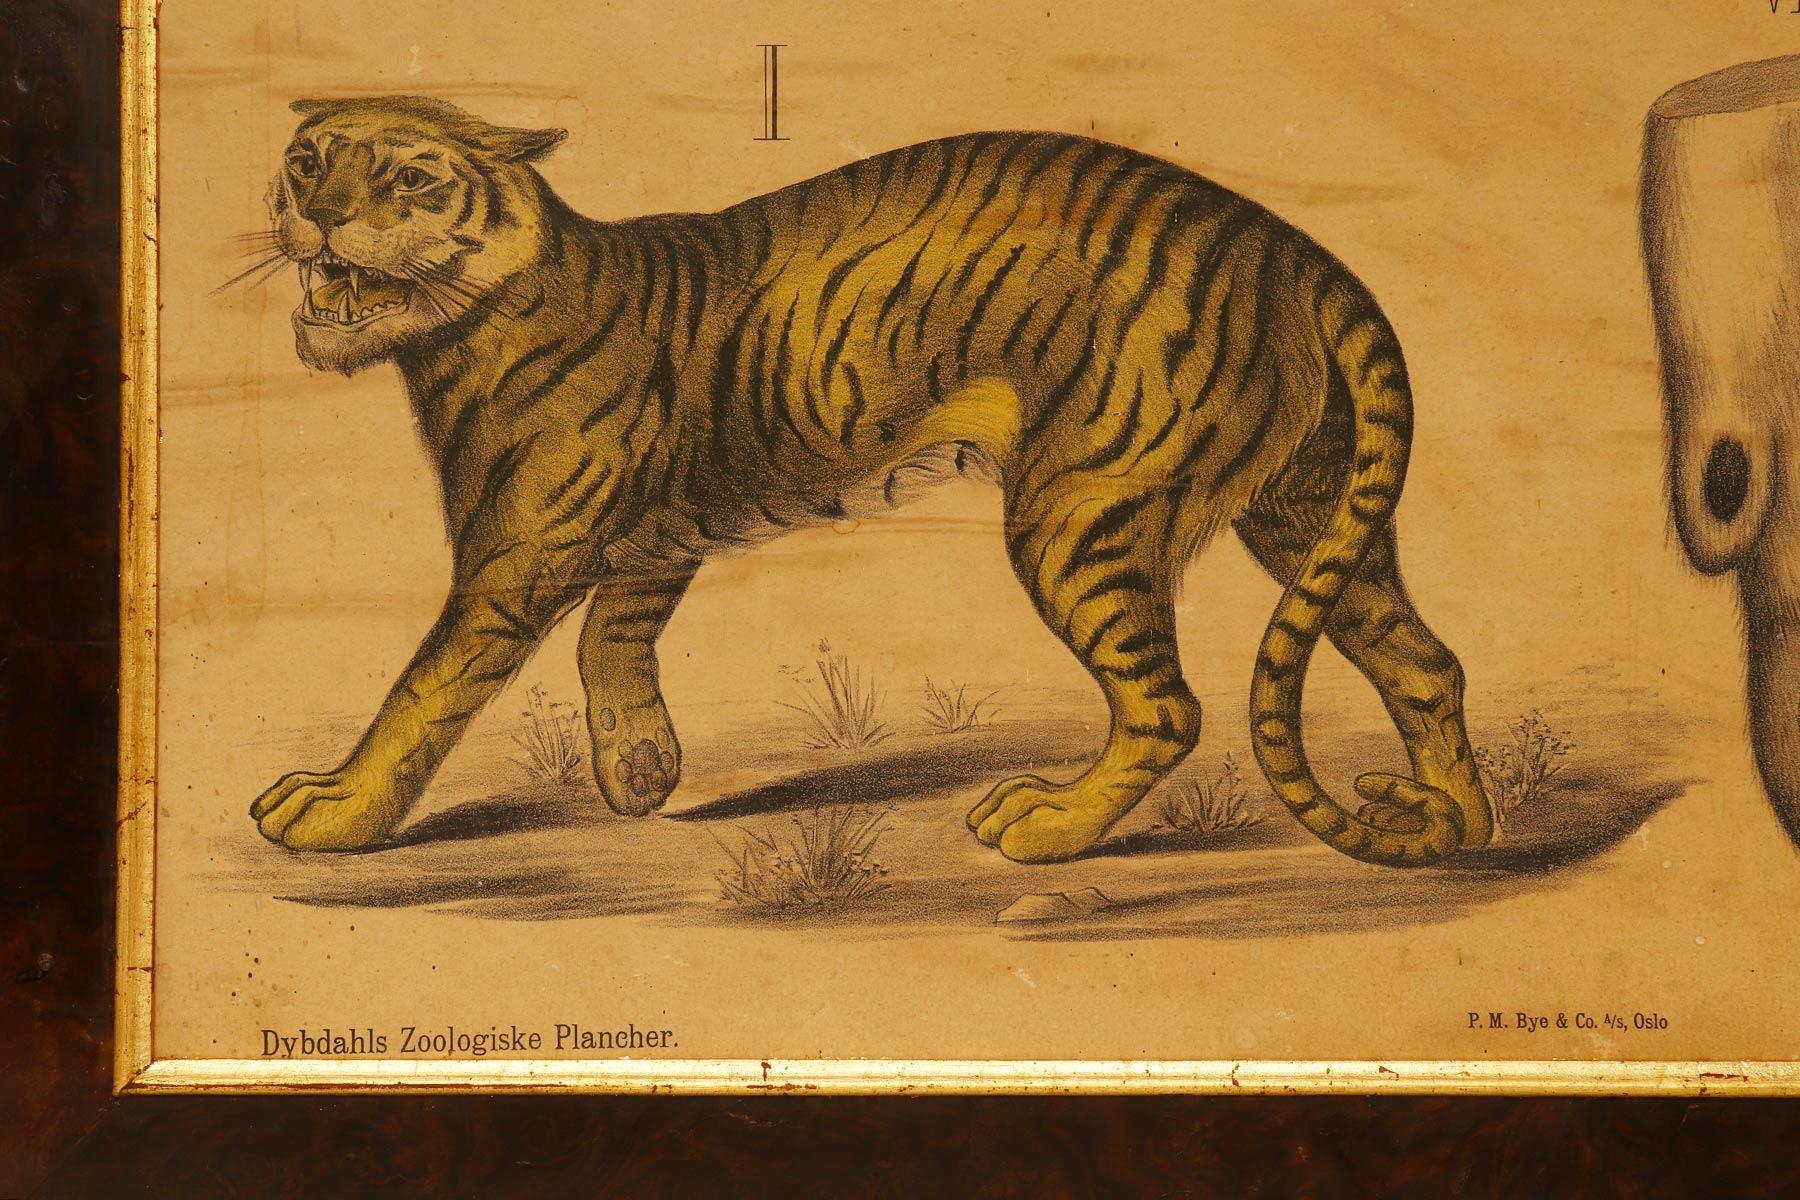 A chromolithographic print on paper by P. Dybdahls, depicting an anatomical table (Pl. 22) of felines. Fir wood frame, walnut briar veneer, with gilded ramin wood edge. H. Aschehoug & co, P.M. Bye & co. Oslo, Norway, late 19th century.